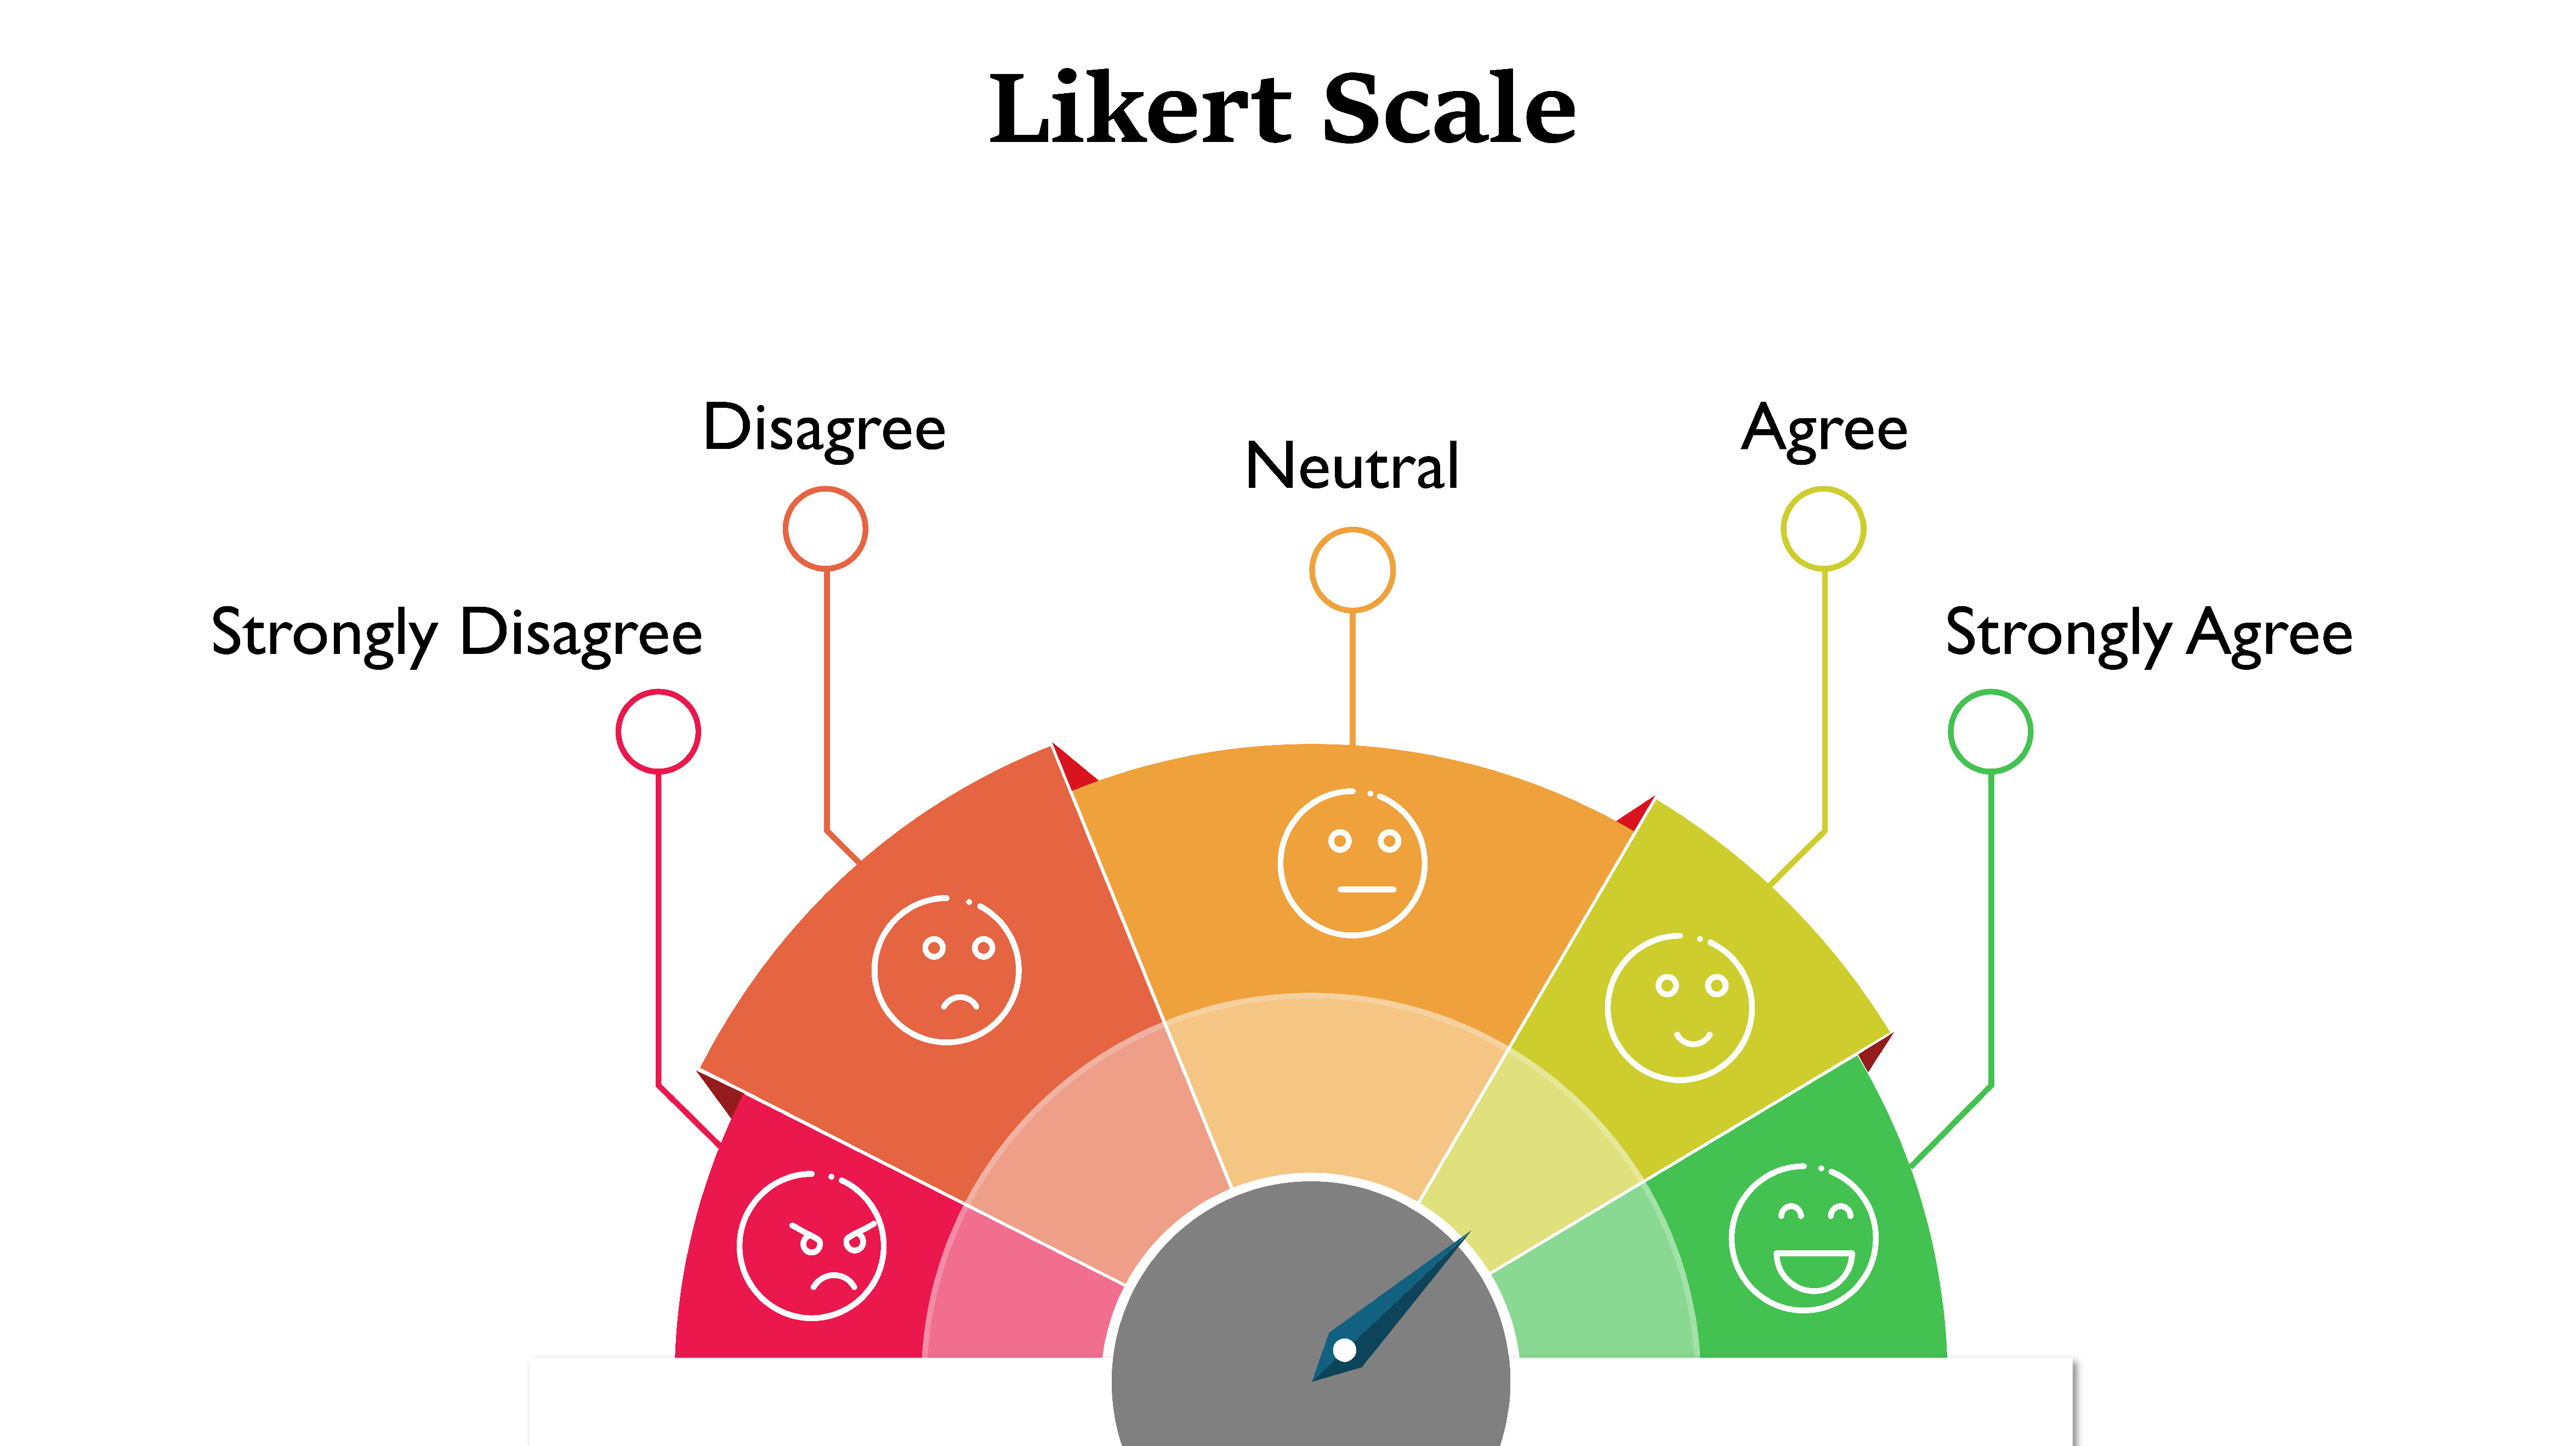 CES calculation with Likert scale